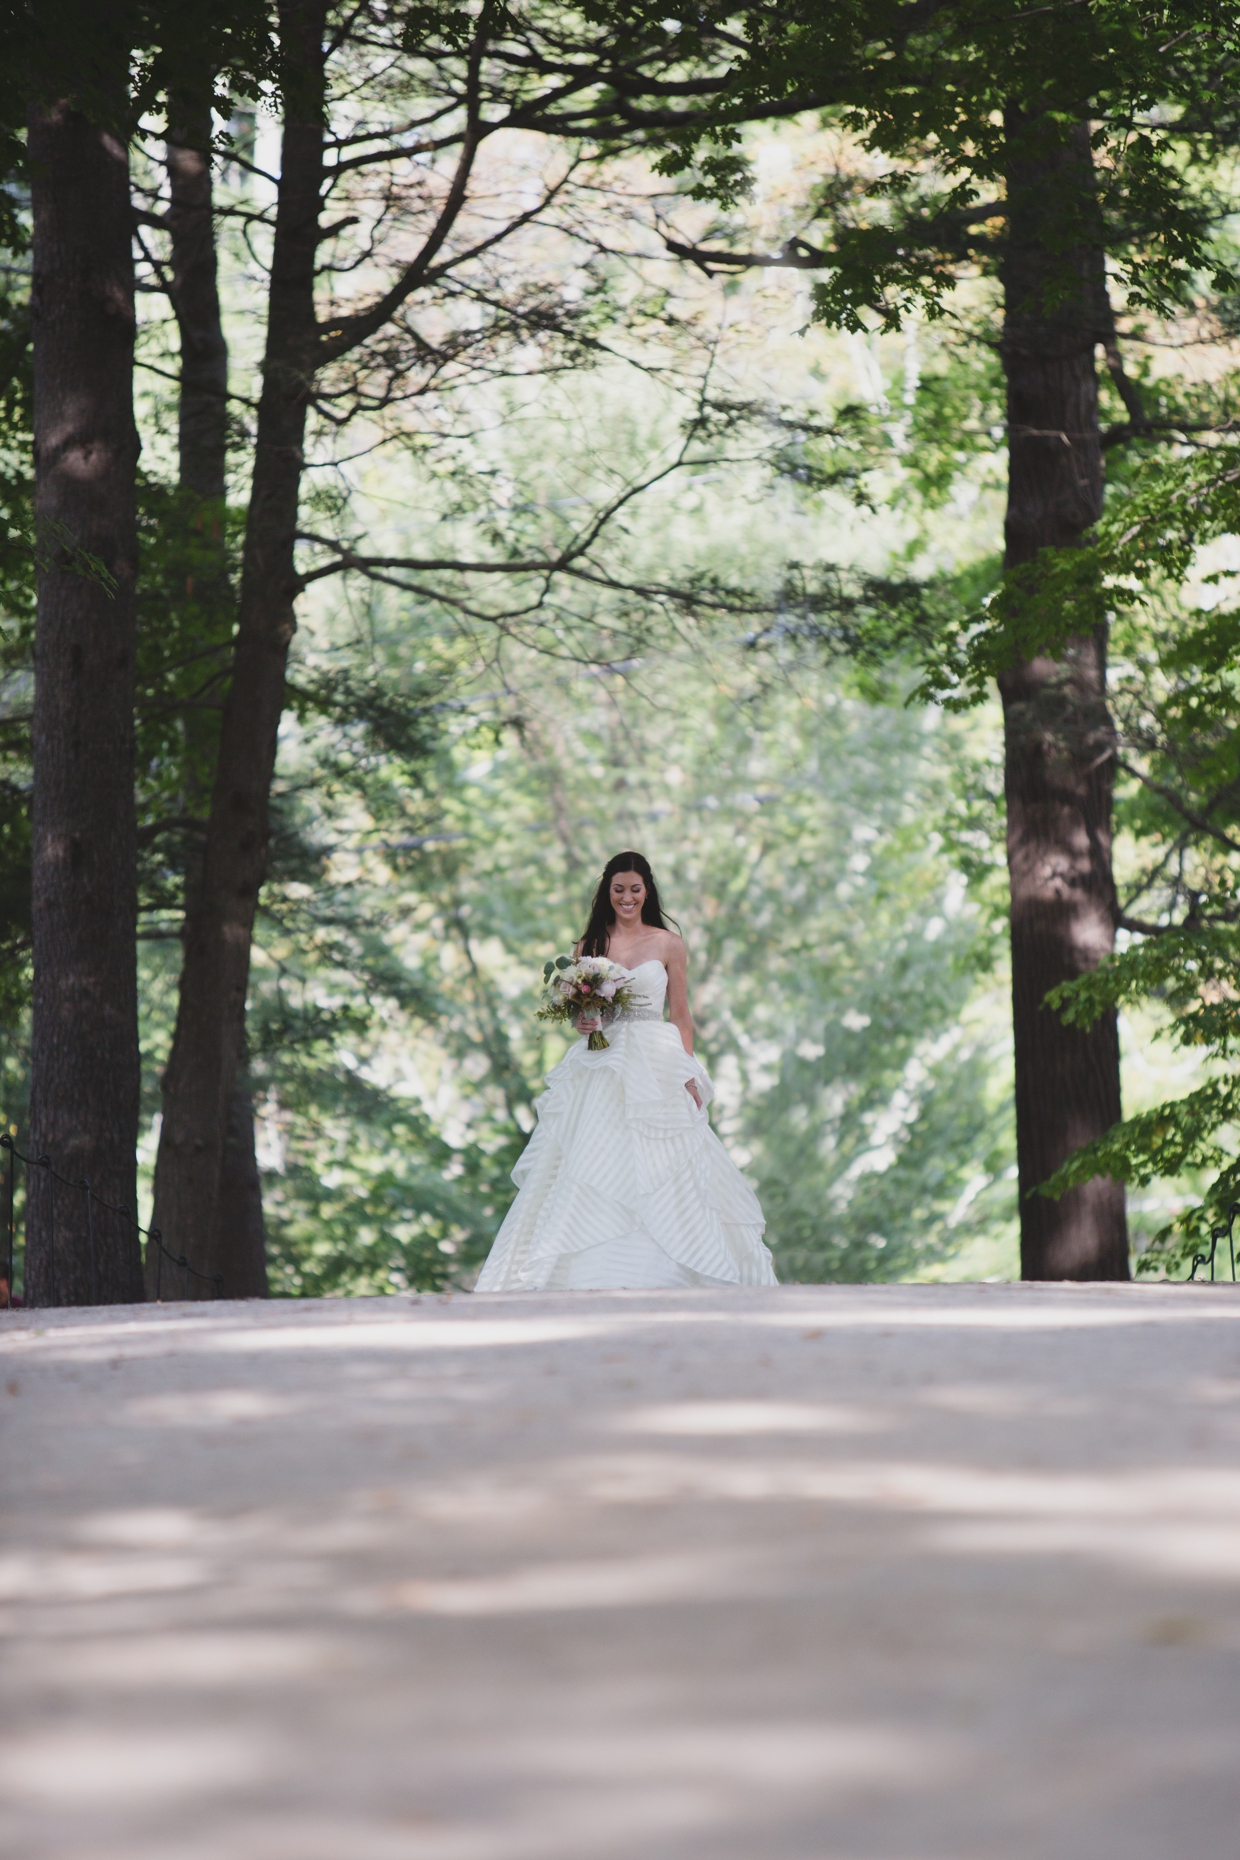 A beautiful candid portrait of a bride walking to meet her groom during the first look of their backyard wedding